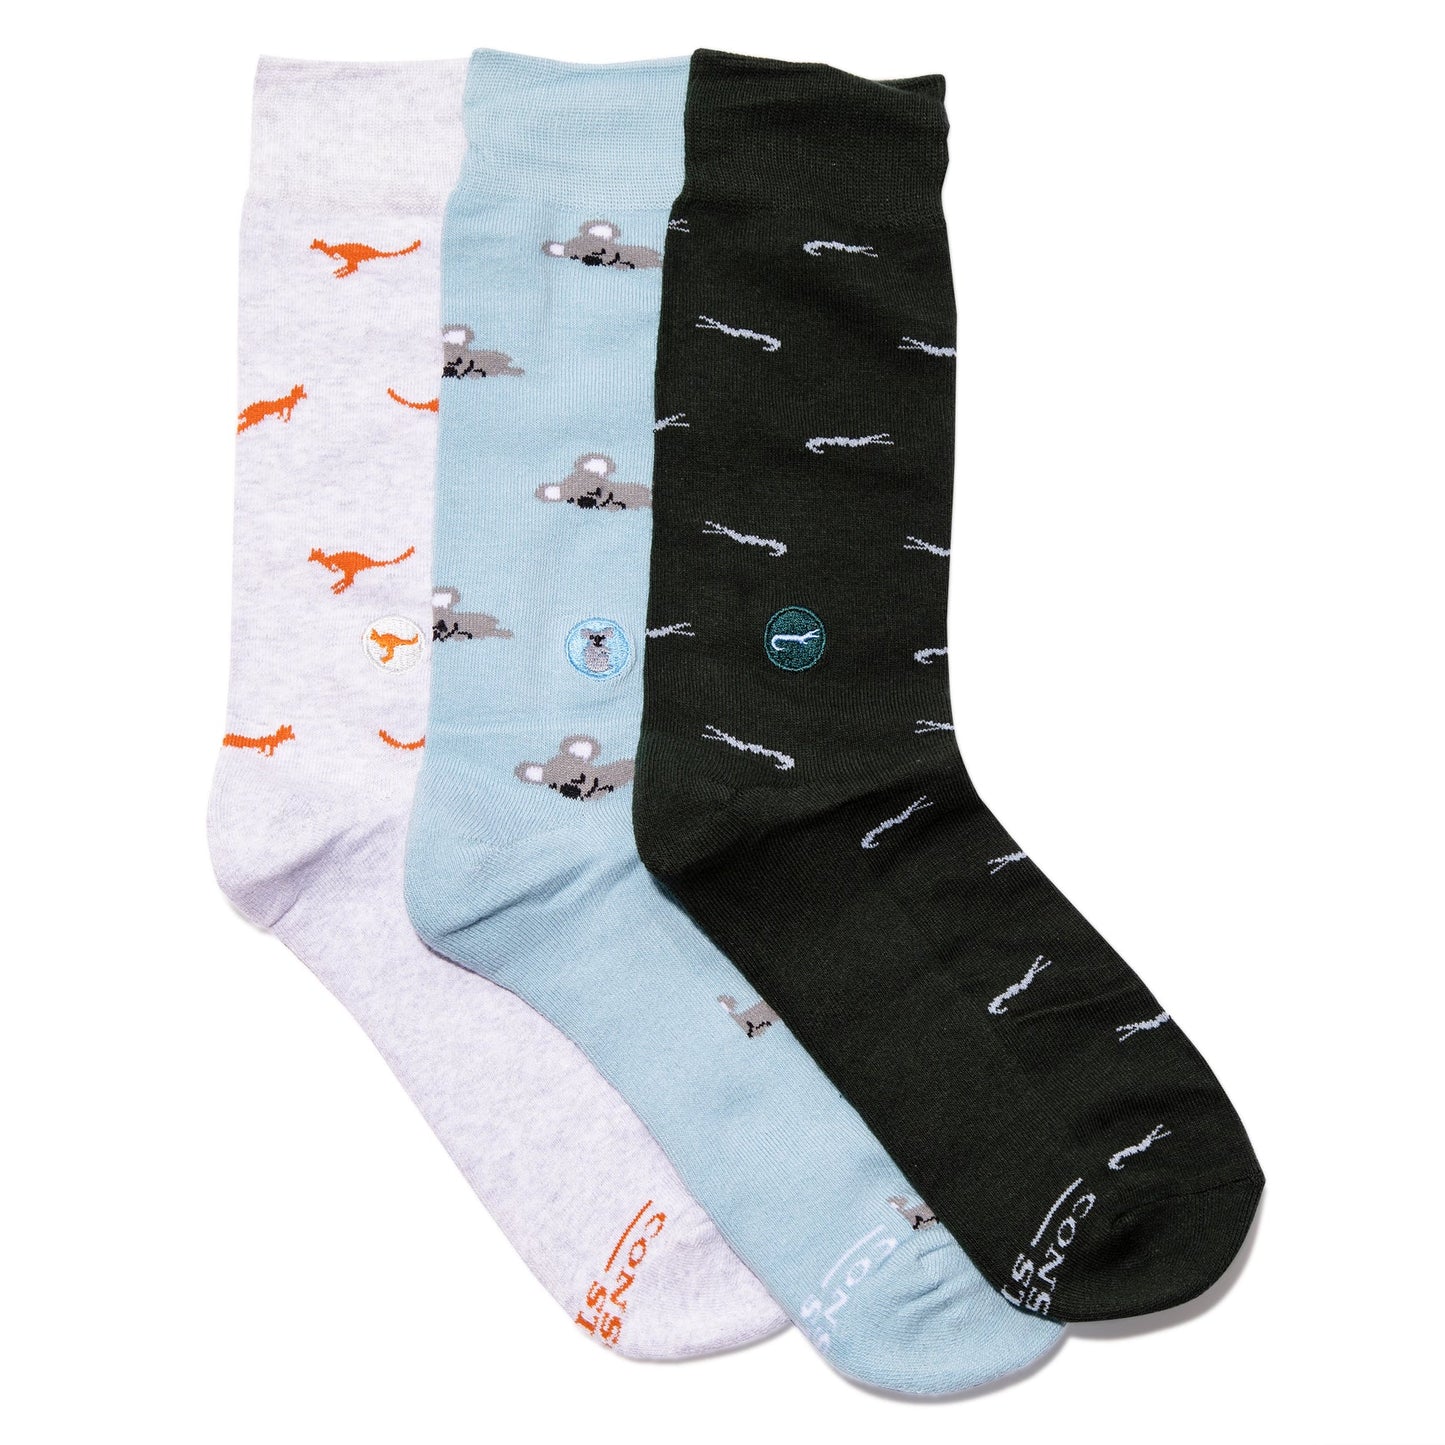 Conscious Step - Gift Box: Socks that Protect Animals